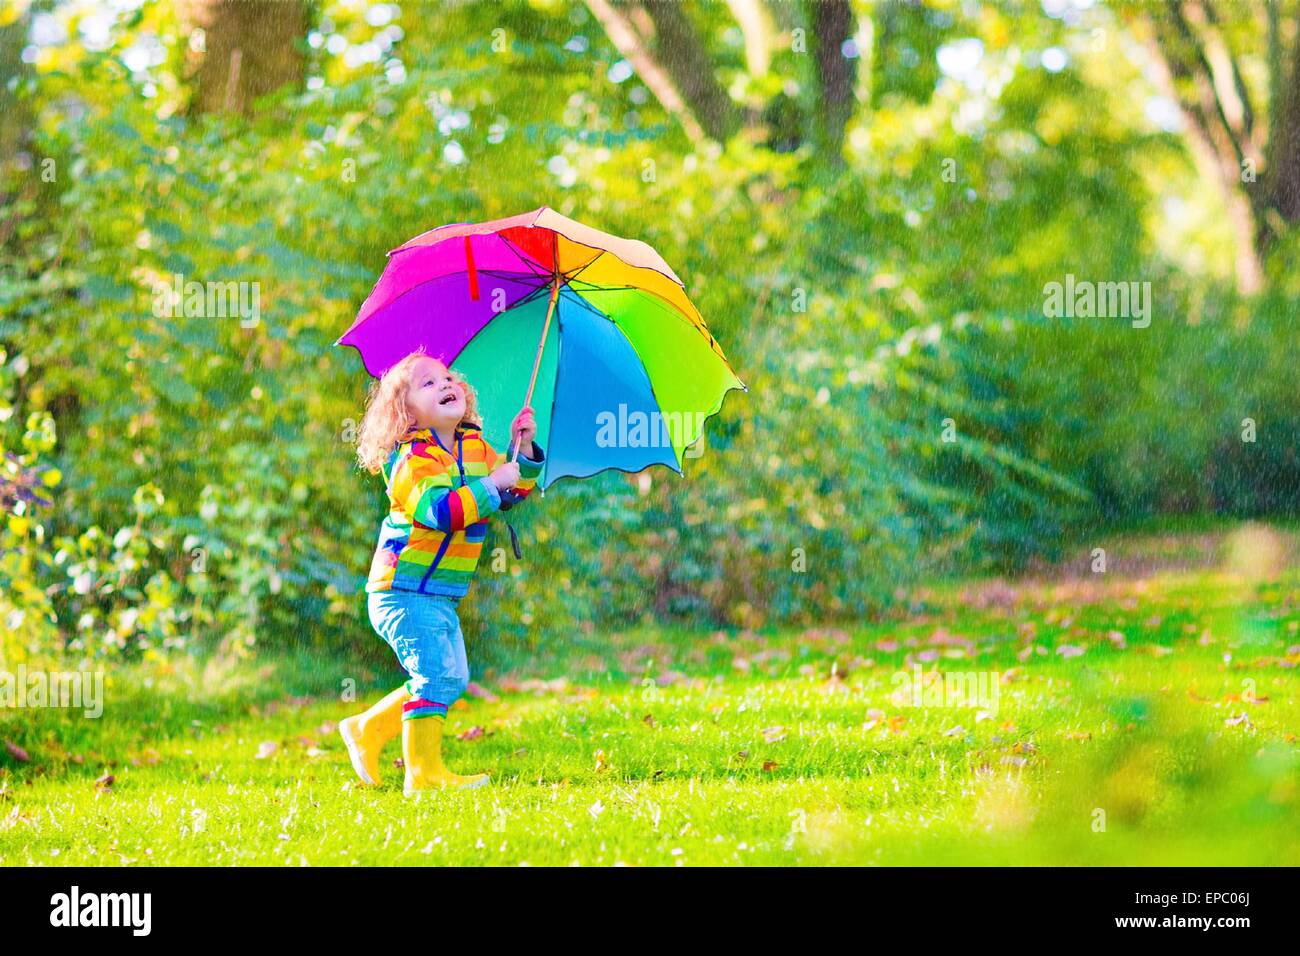 Funny cute curly toddler girl wearing yellow waterproof coat and boots holding colorful umbrella playing in the garden by rain Stock Photo